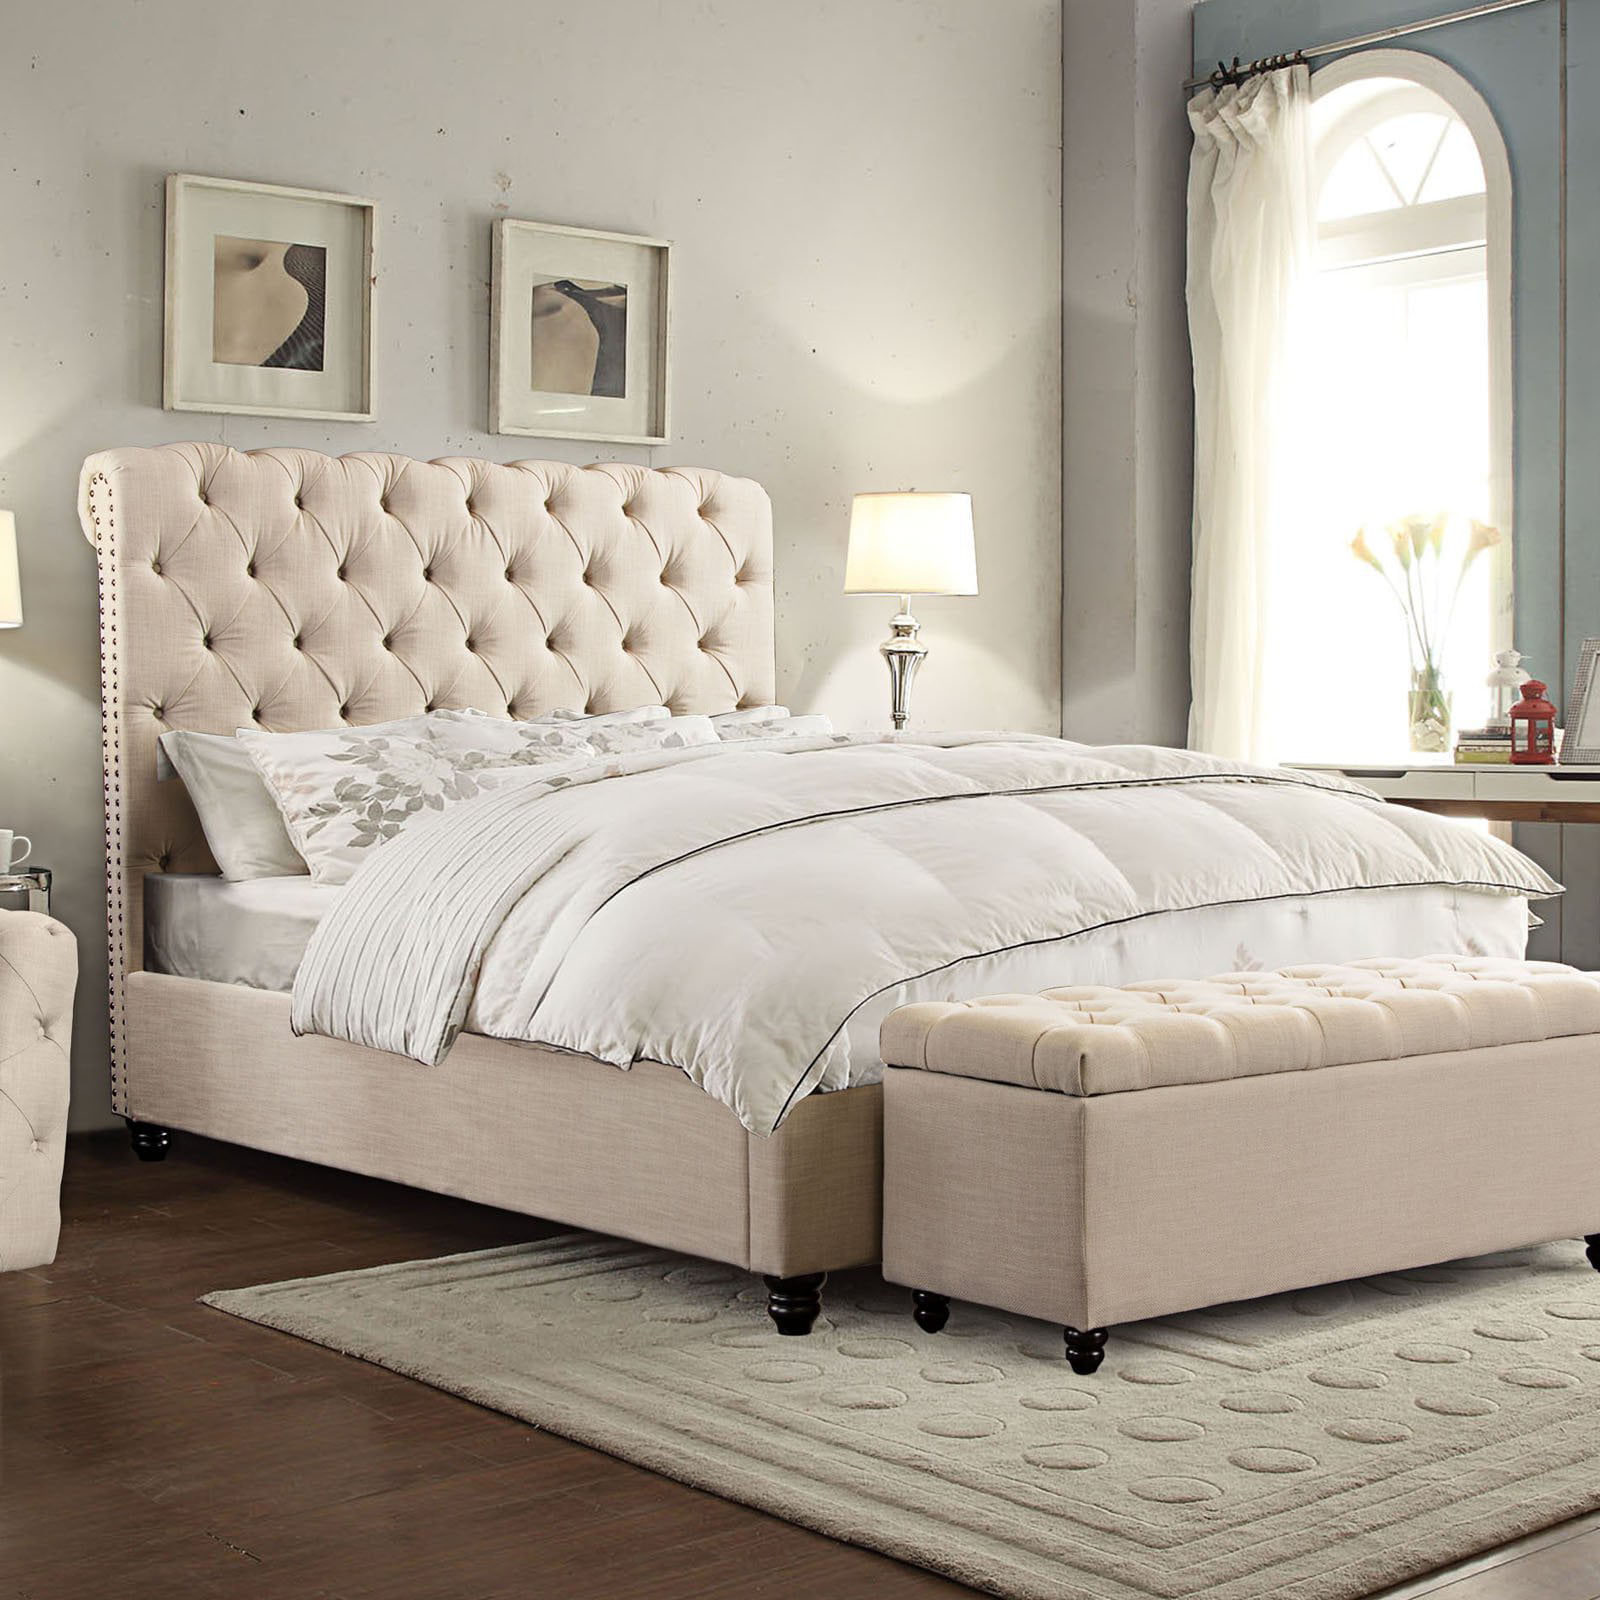 Creatice Bedroom With Tufted Headboard for Living room